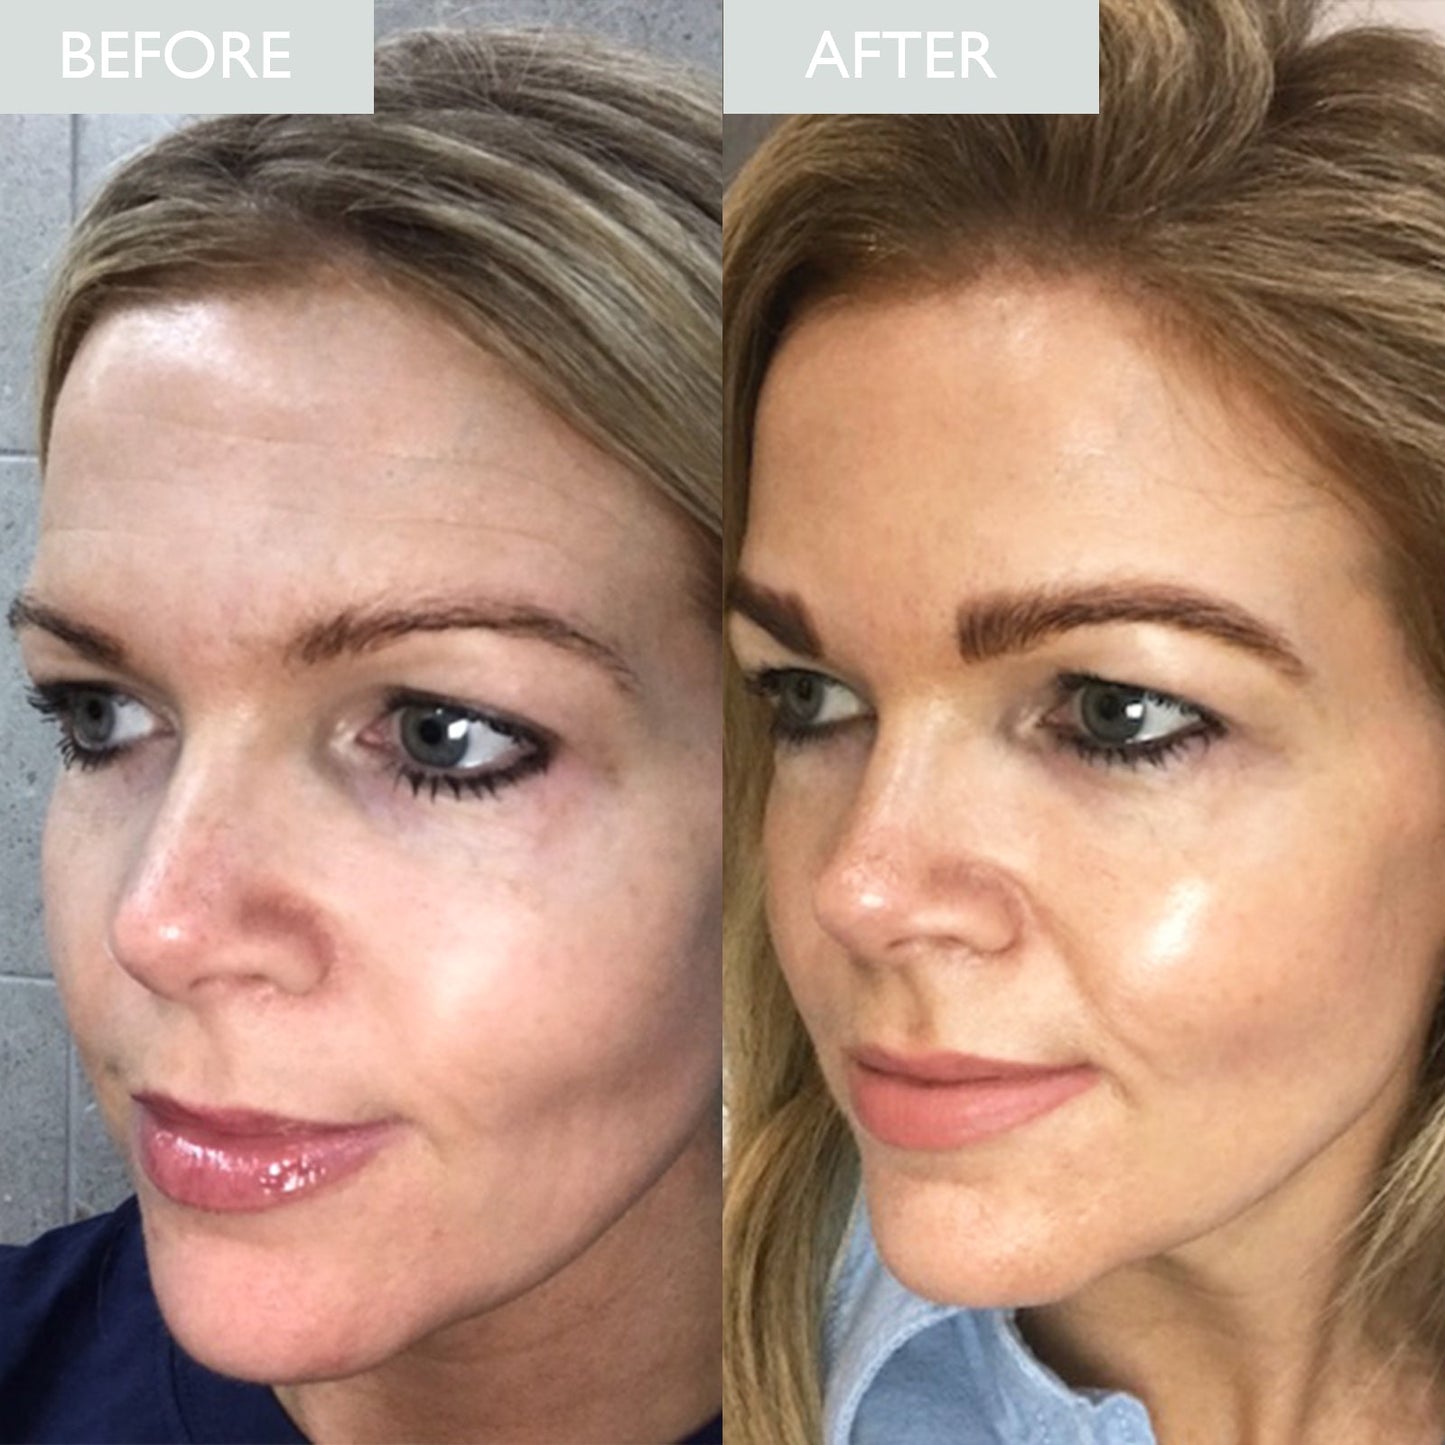 SPF 30 anti-ageing day cream before and after